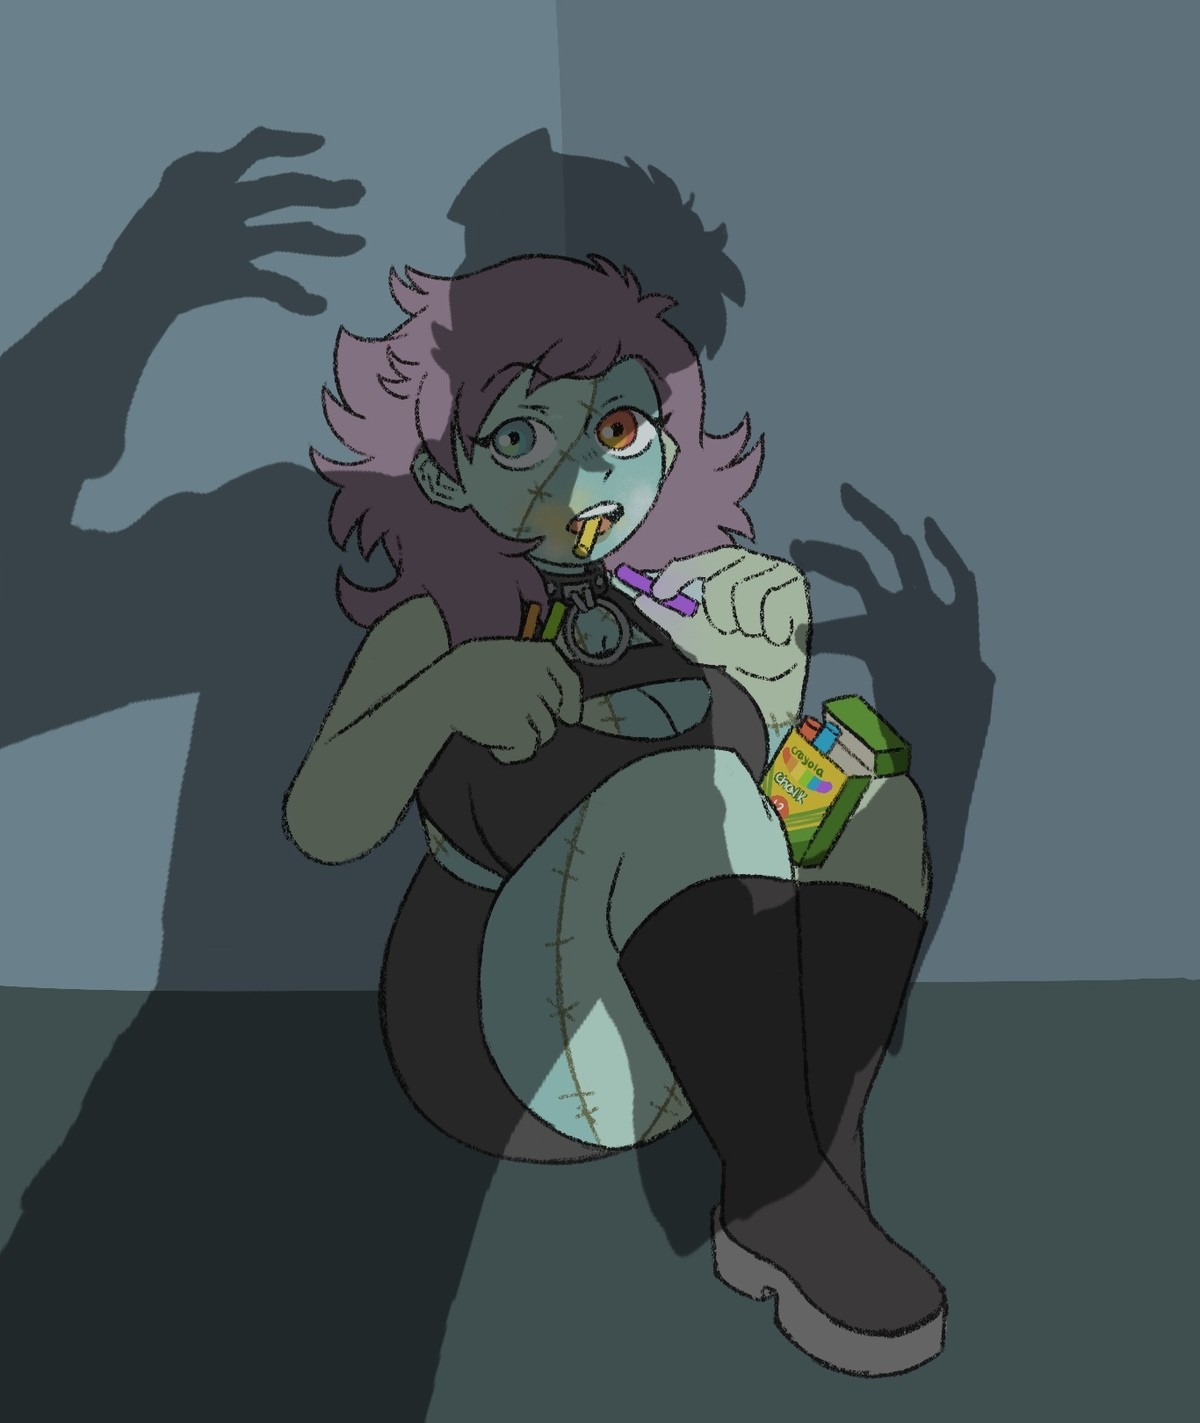 Death By Chalk-alot. The monster feeds. She just feeds on chalk. She heard some of the townsfolk talking about how ladies love good “chalk-alot” so she begged t